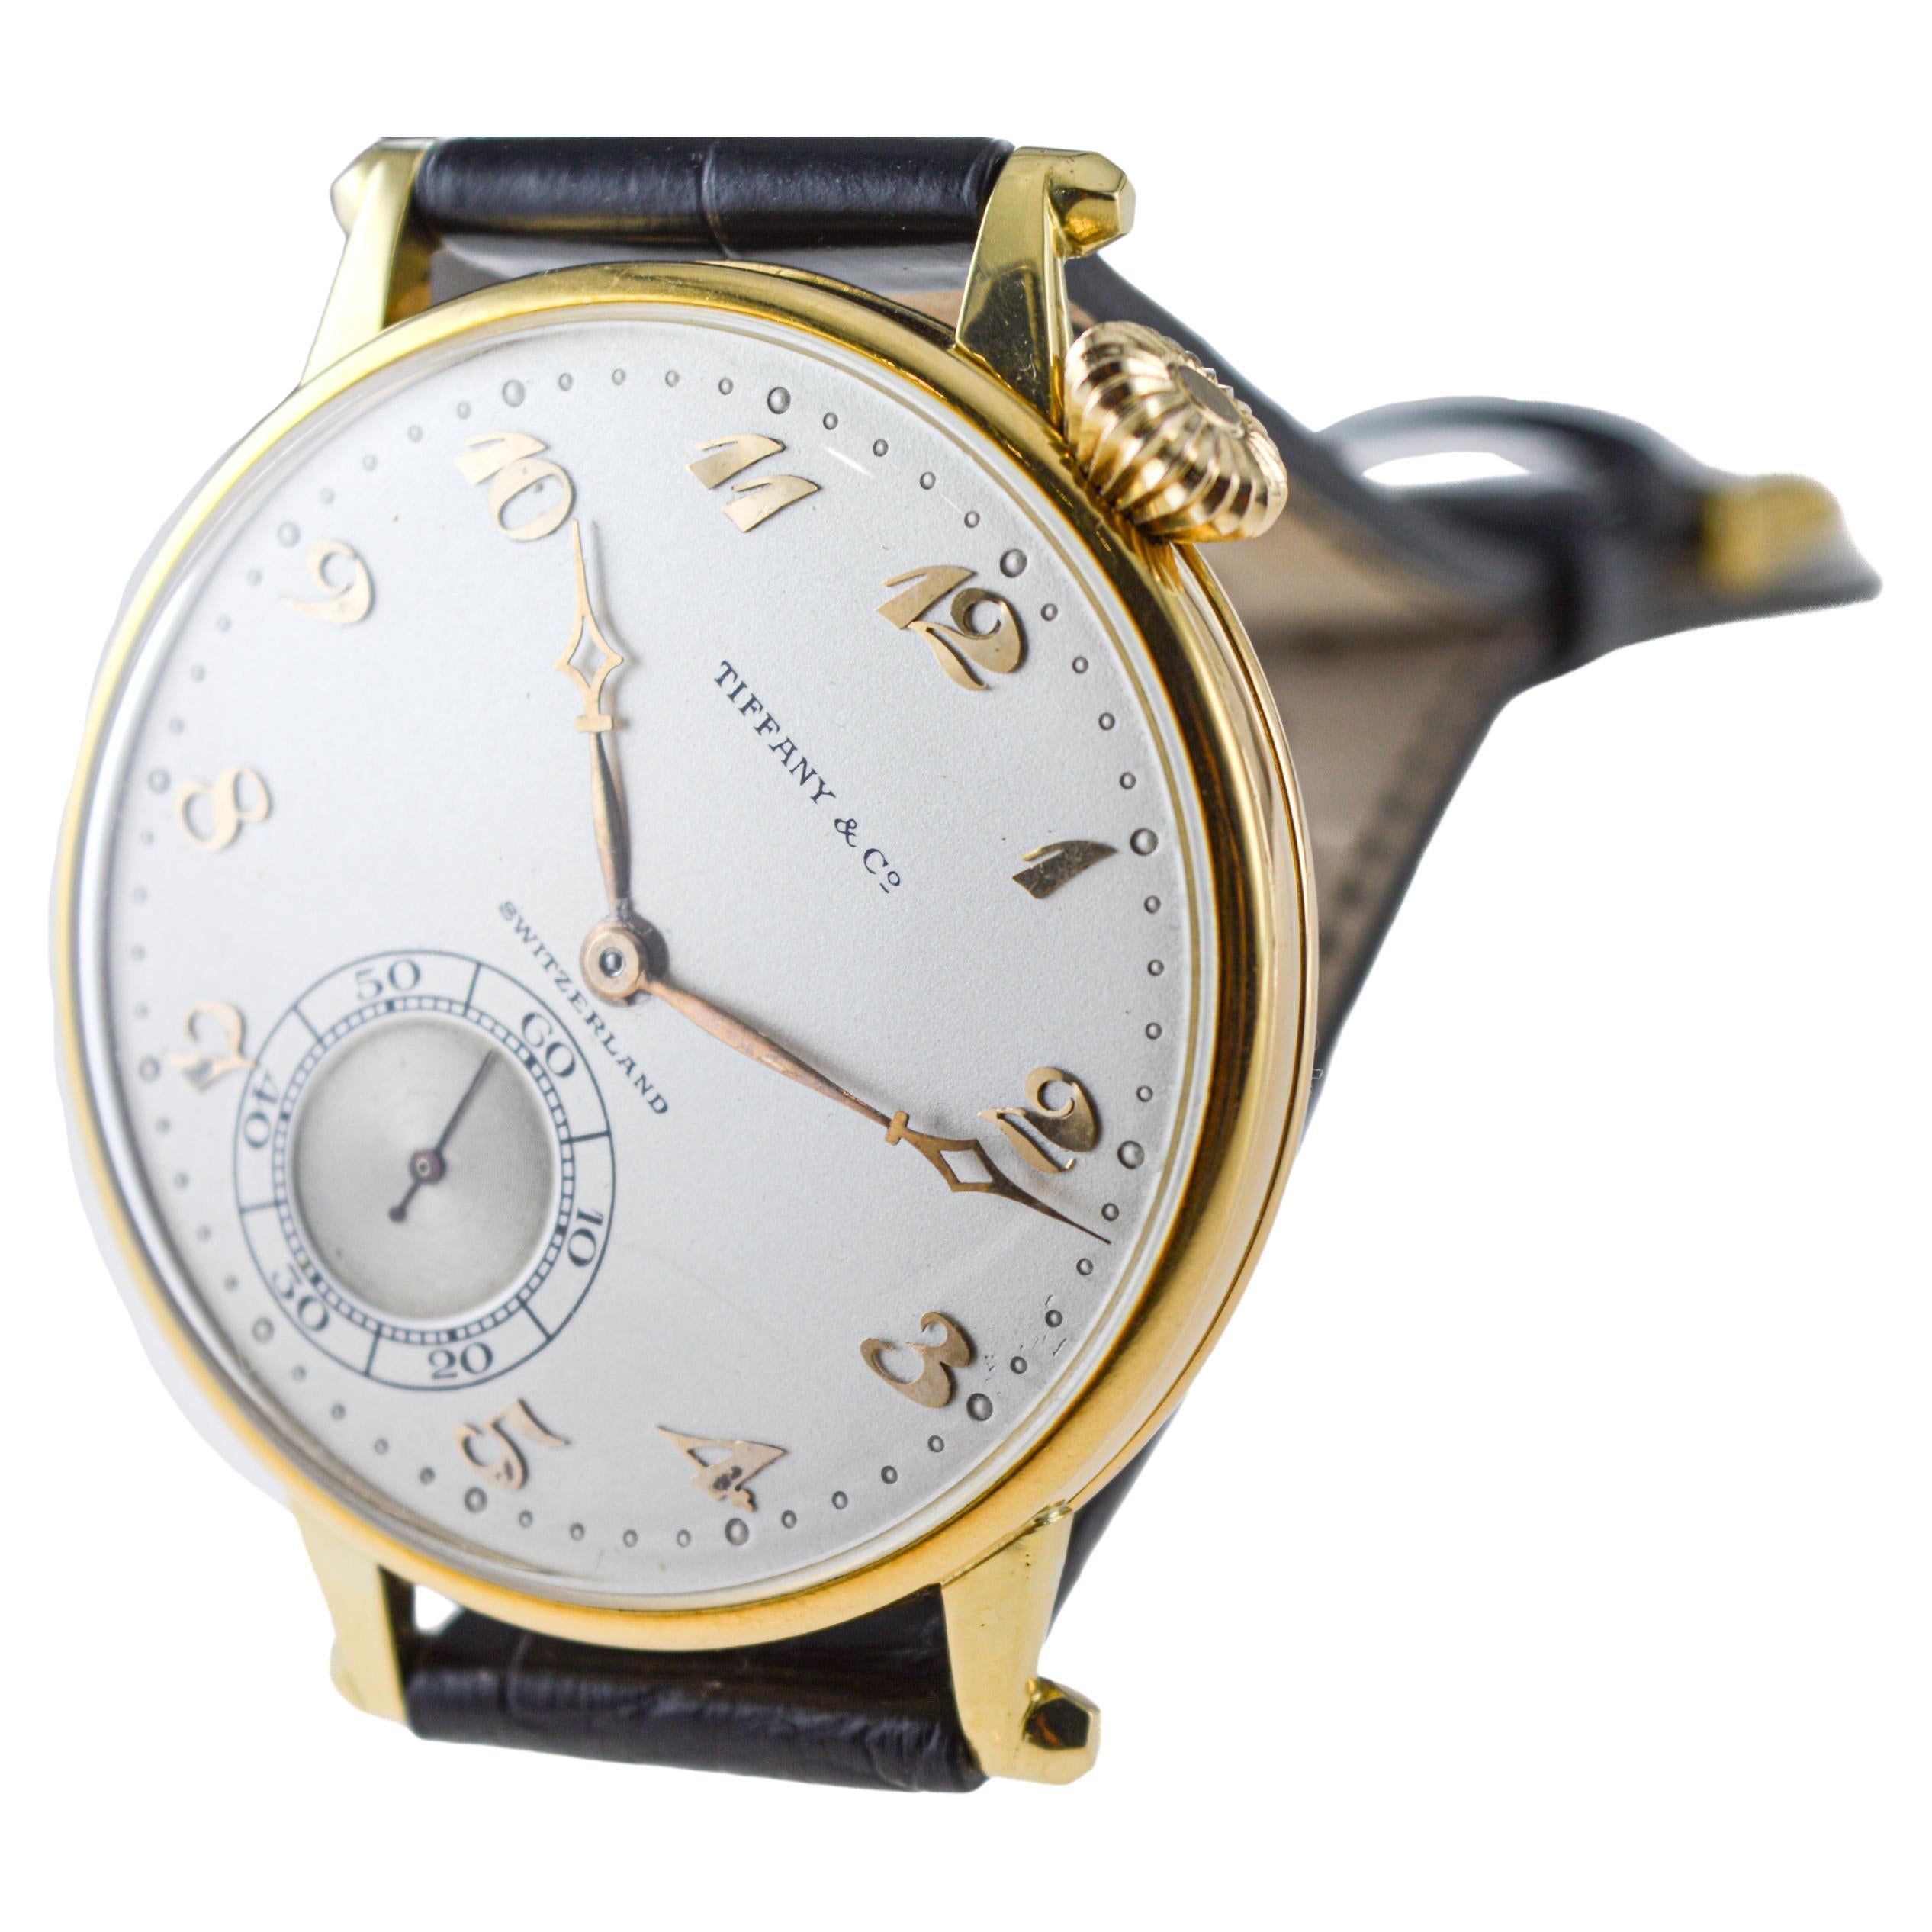 Agassiz 18Kt. Gold Oversized Watch for Tiffany & Co. Stern Freres Dial 1920's For Sale 1